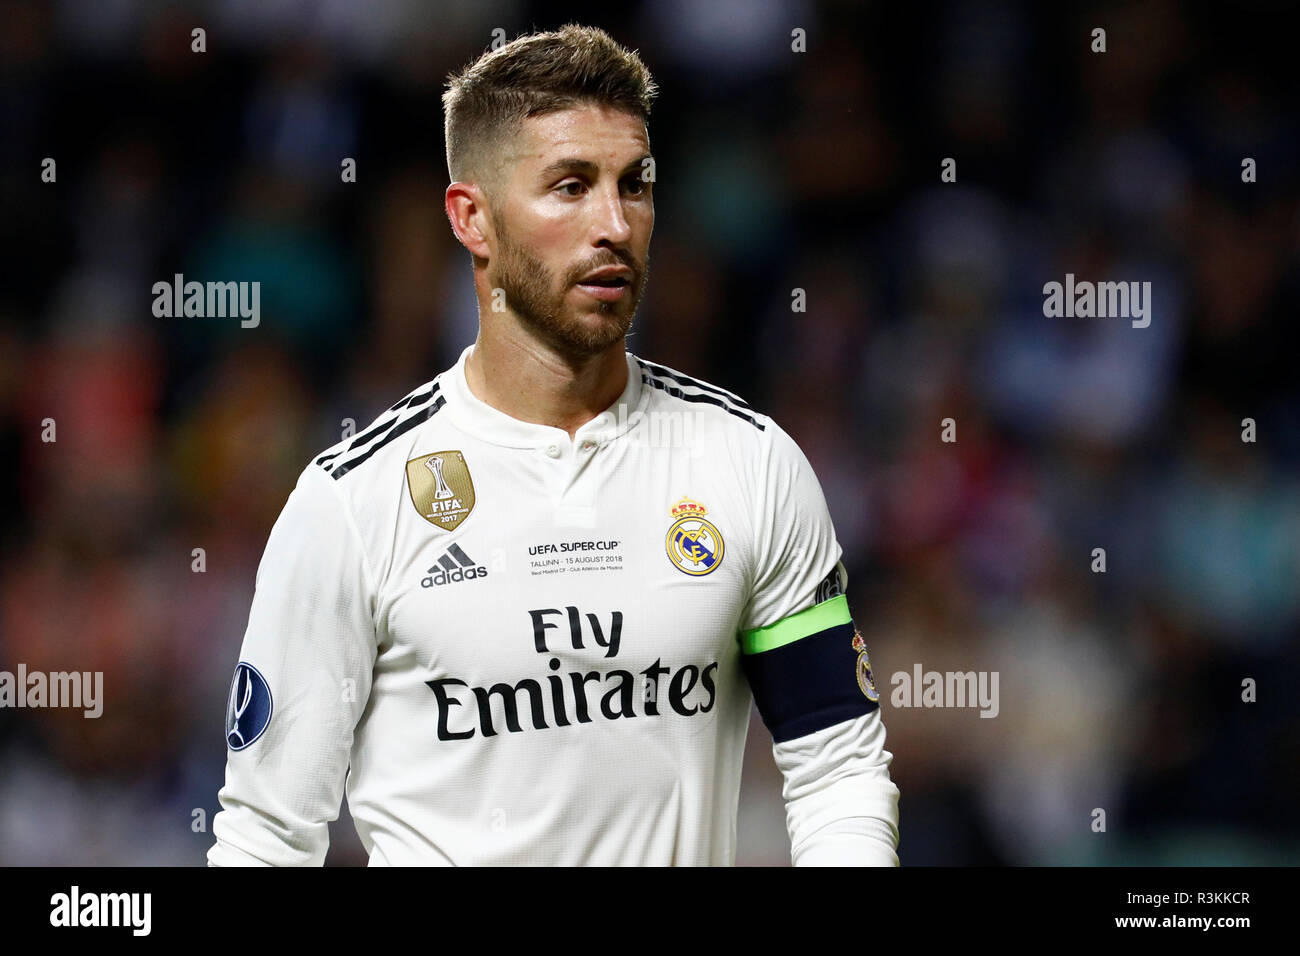 TALLINN, ESTONIA - AUGUST 15: Sergio Ramos of Real Madrid during the UEFA  Super Cup match between Real Madrid and Atletico Madrid at A Le Coq Arena  on August 15, 2018 in